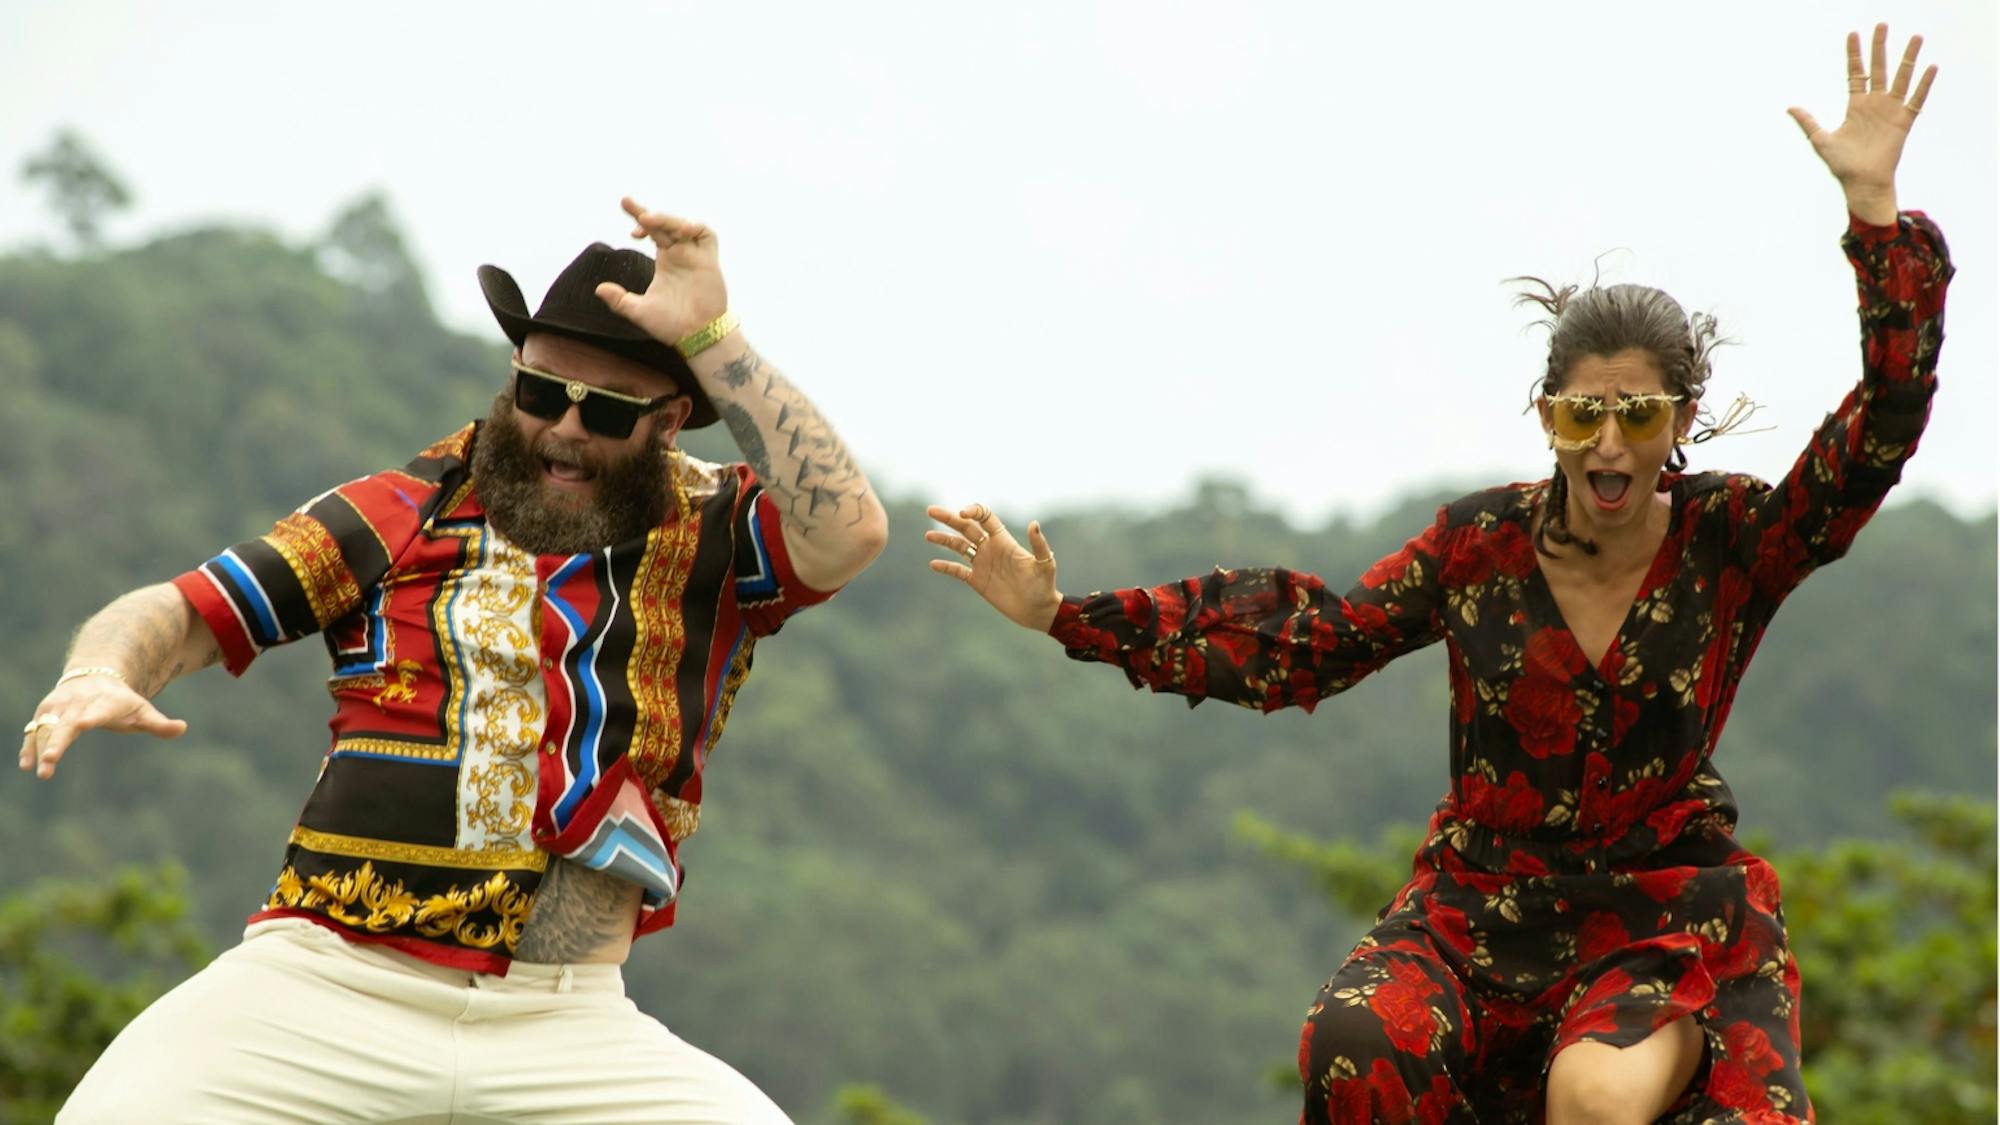 Helsinko (Darko Perić) and Nairobi (Alba Flores) jump, with alarmed expressions on their faces. Helsinko wears a colorful shirt, which reveals his tattooed body, sunglasses, and a cowboy hat. Nairobi wears a flowered dresses and glasses.